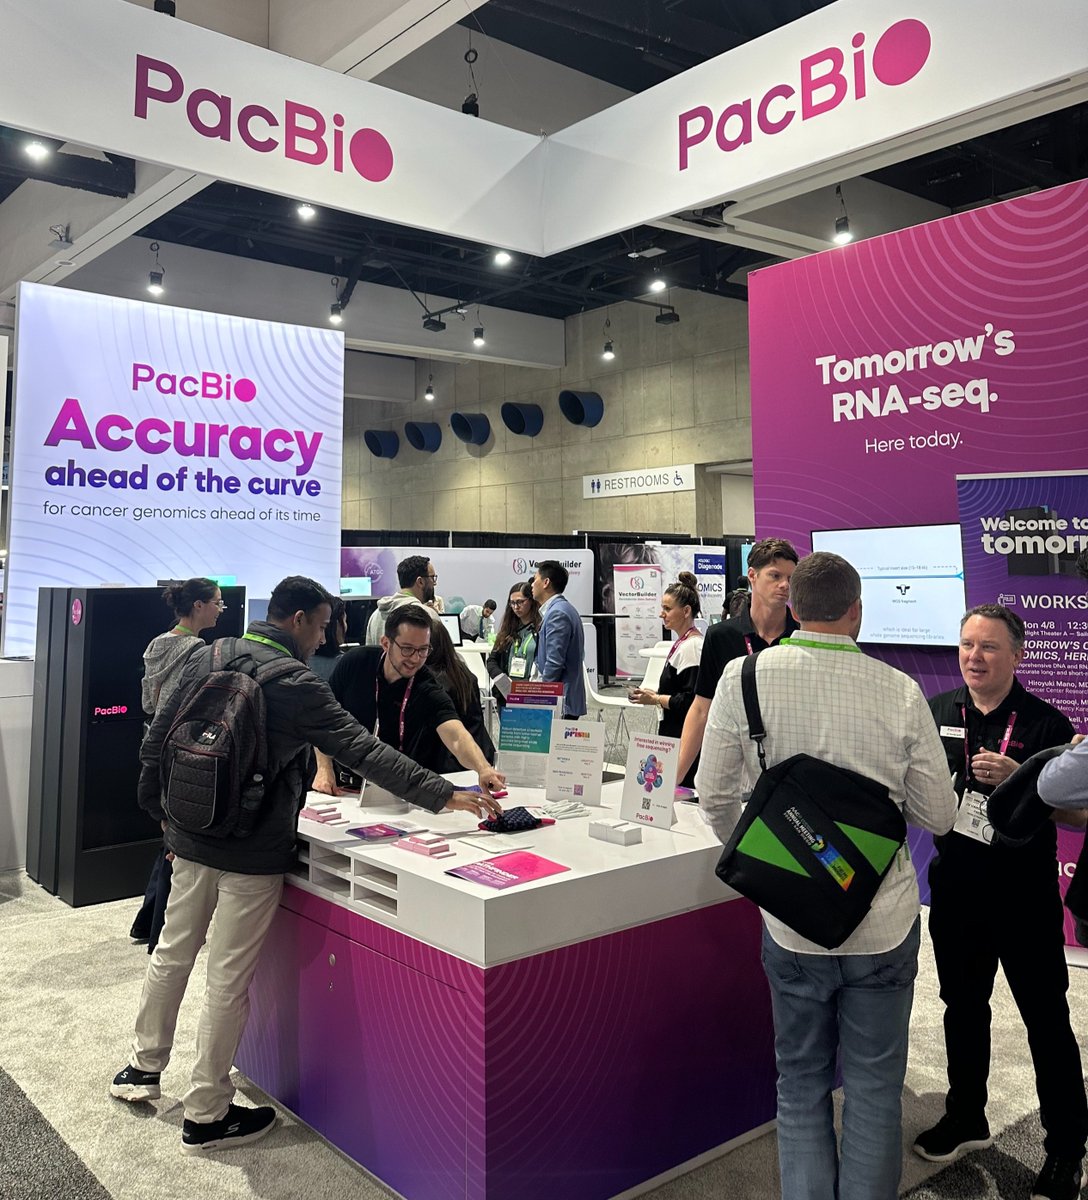 We’ve seen so many friendly faces so far at #AACR24! If you haven’t visited, come see what you’ve been missing and chat with the #PacBio team at Booth #1245. Drop by to find out more: bit.ly/3J2n654